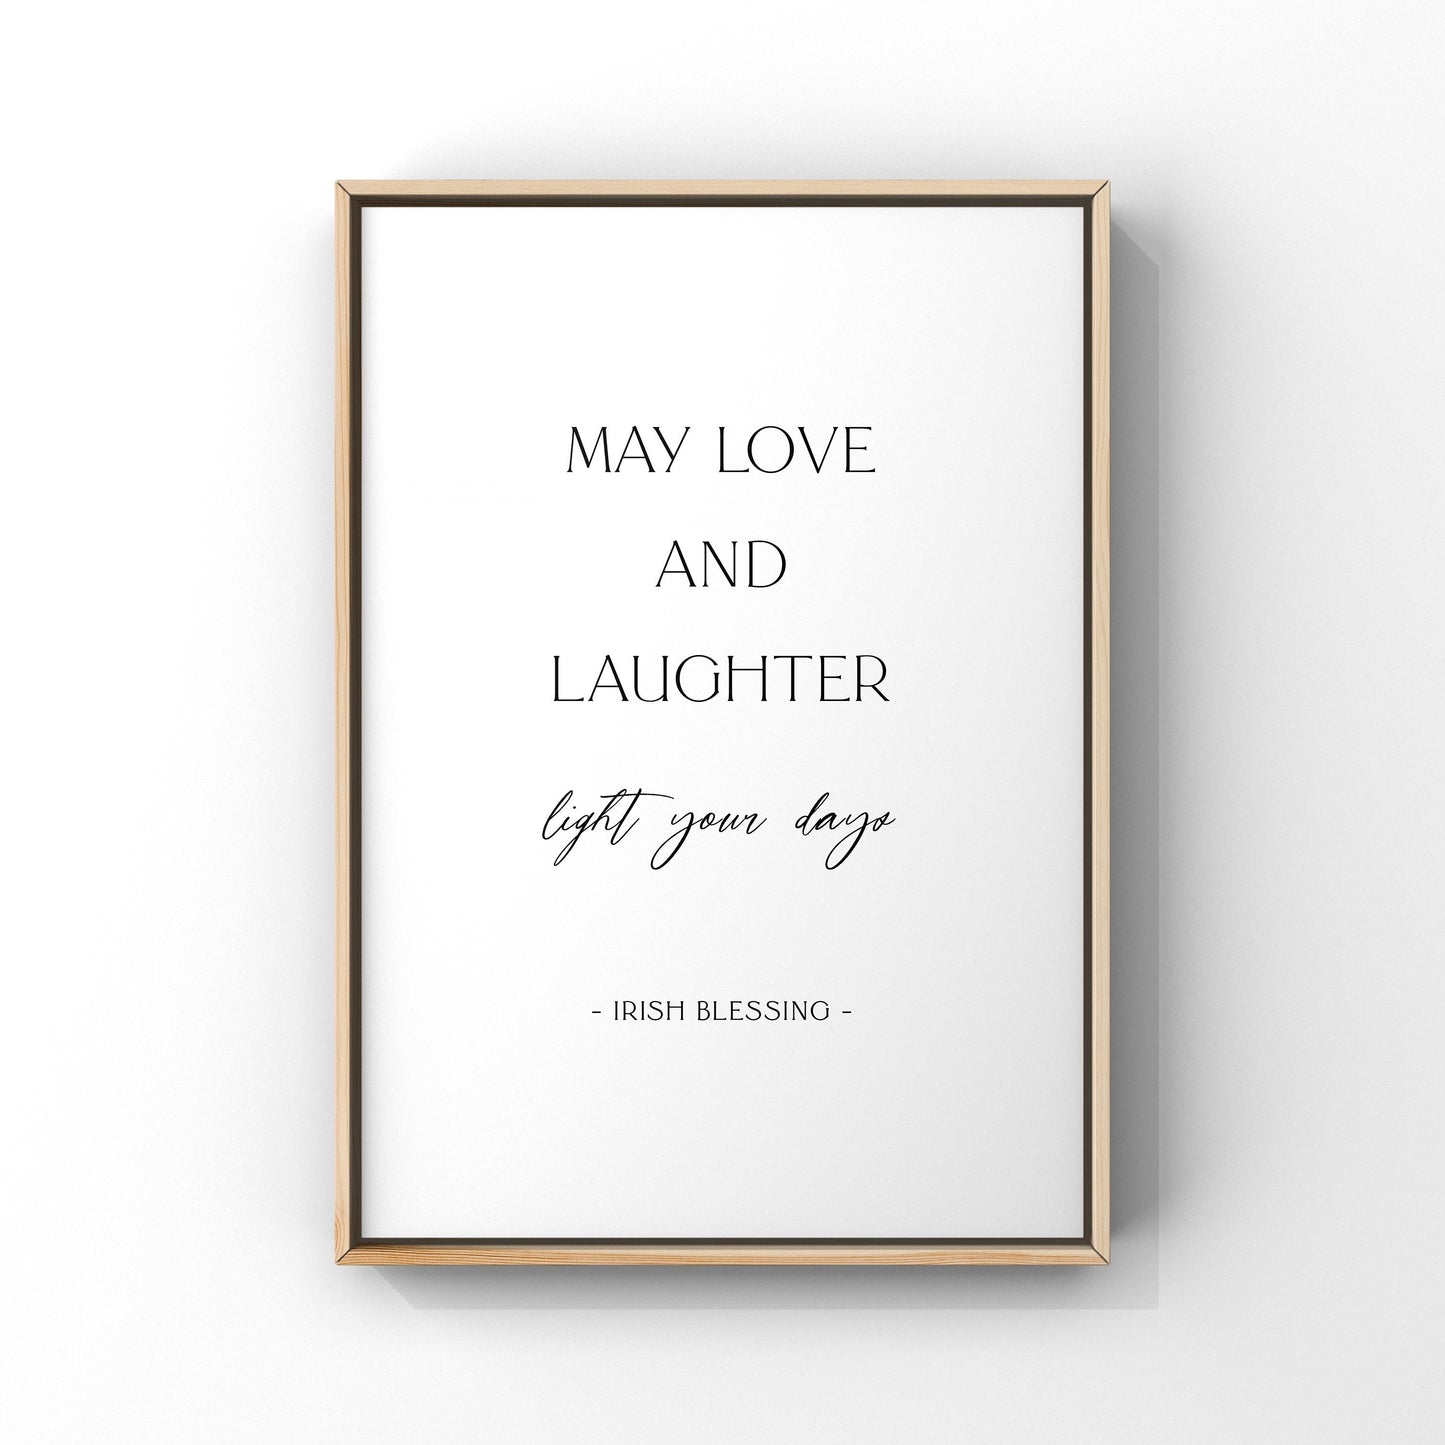 May love and laughter light your days, Irish Blessing quote print, Irish Blessing wall art, St Patricks Day decor, St Patricks Day sign